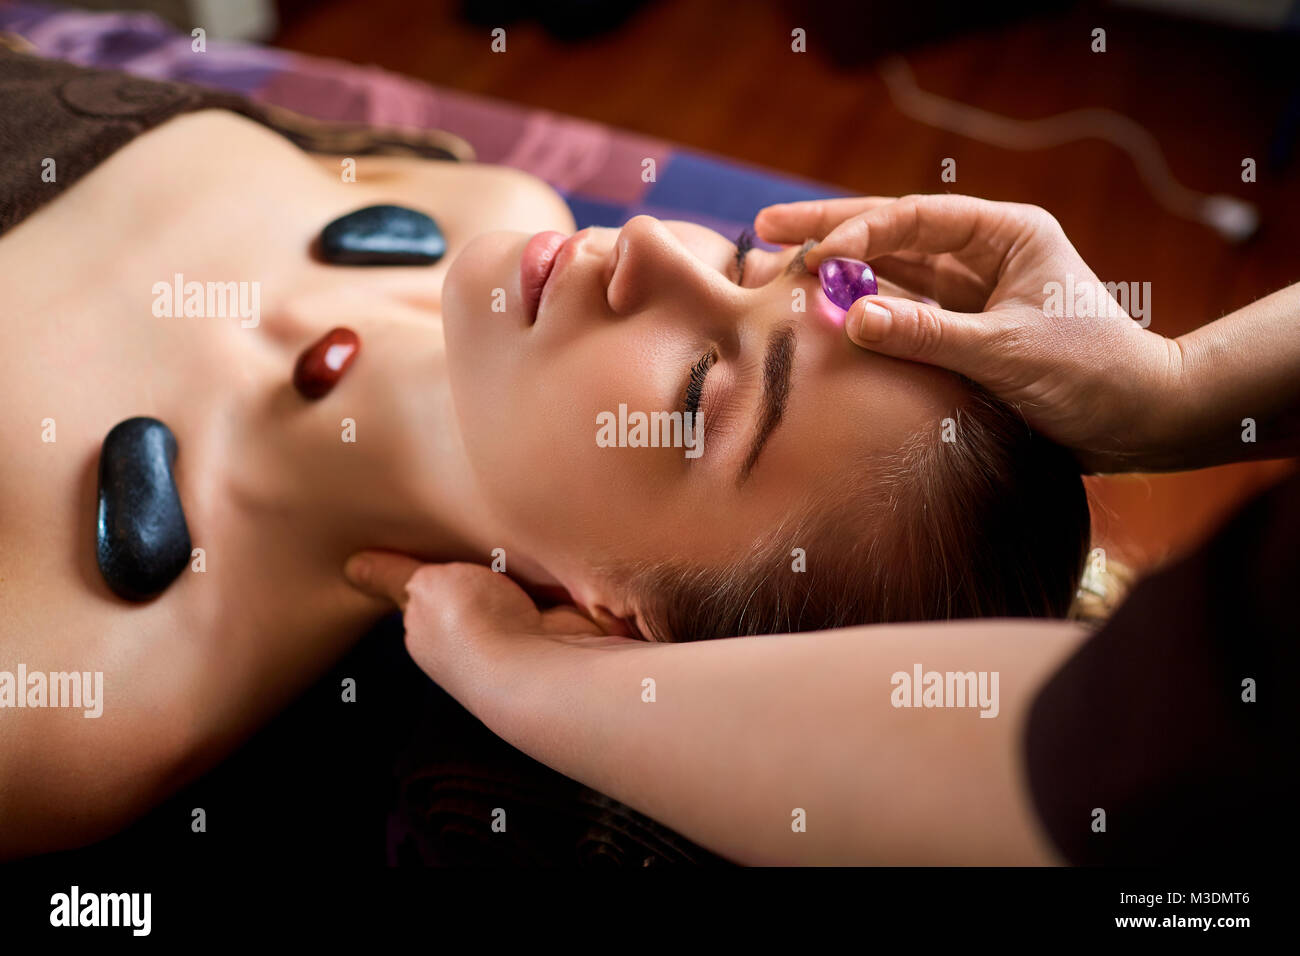 Stone massage is a facial massage for a woman. Stock Photo